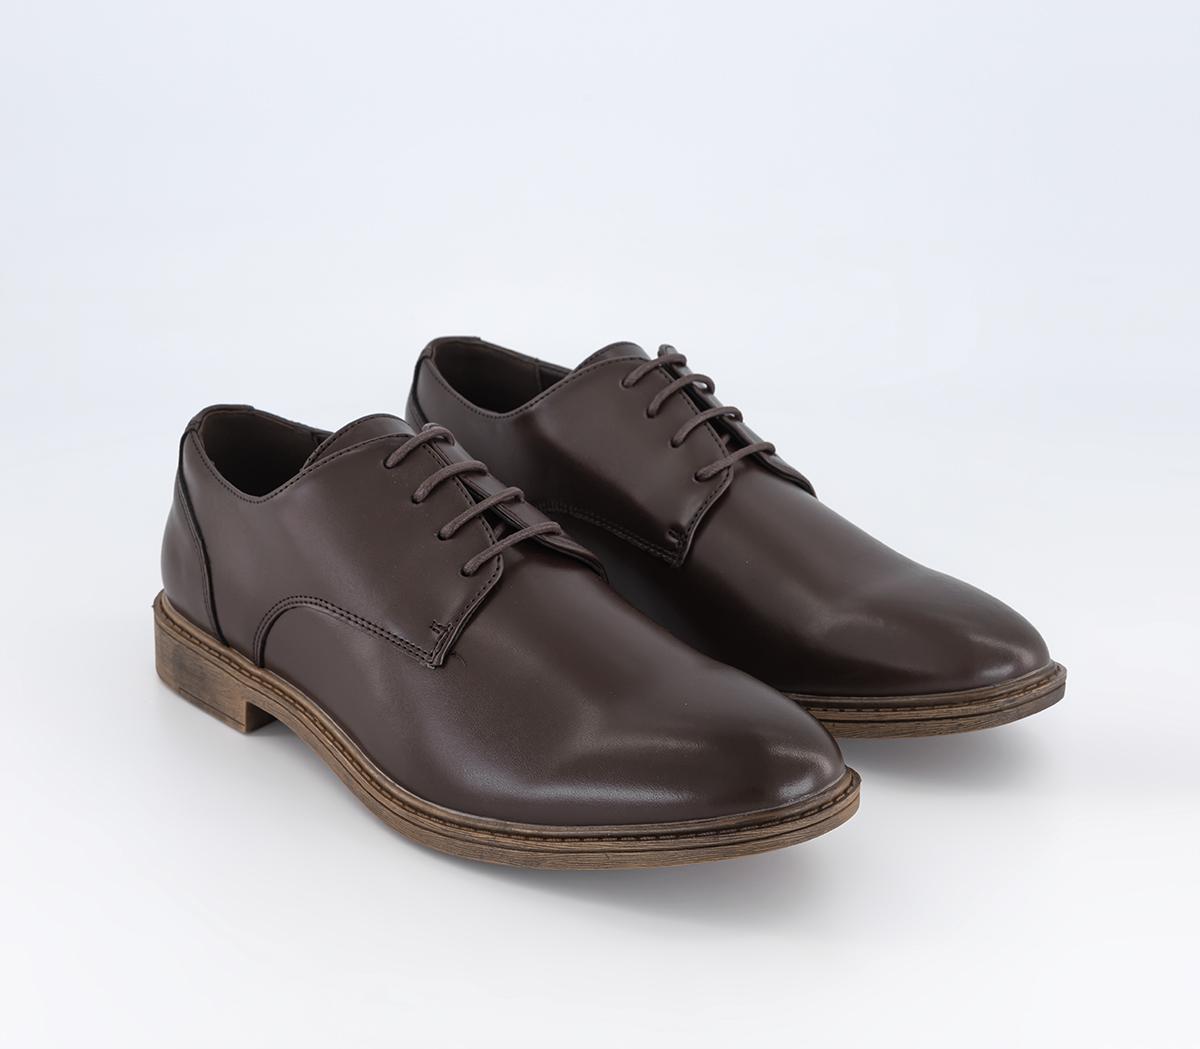 OFFICE Mens Curton Leather Derby Shoes Brown Leather, 10